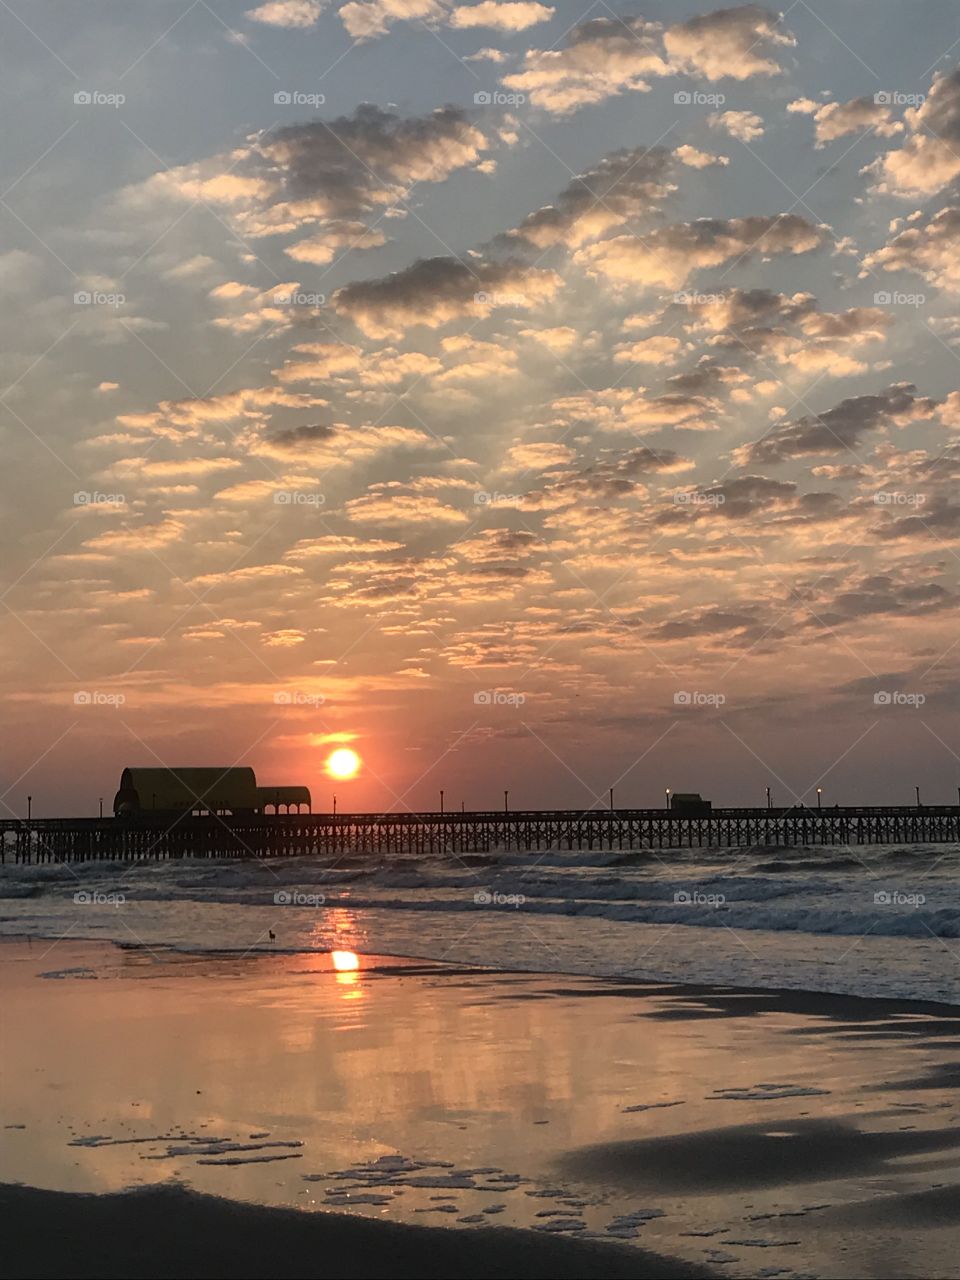 A beautiful, warm summer sunrise on the Myrtle Beach coast. A gorgeous salmon-colored sun shines and illuminates the cool waters.